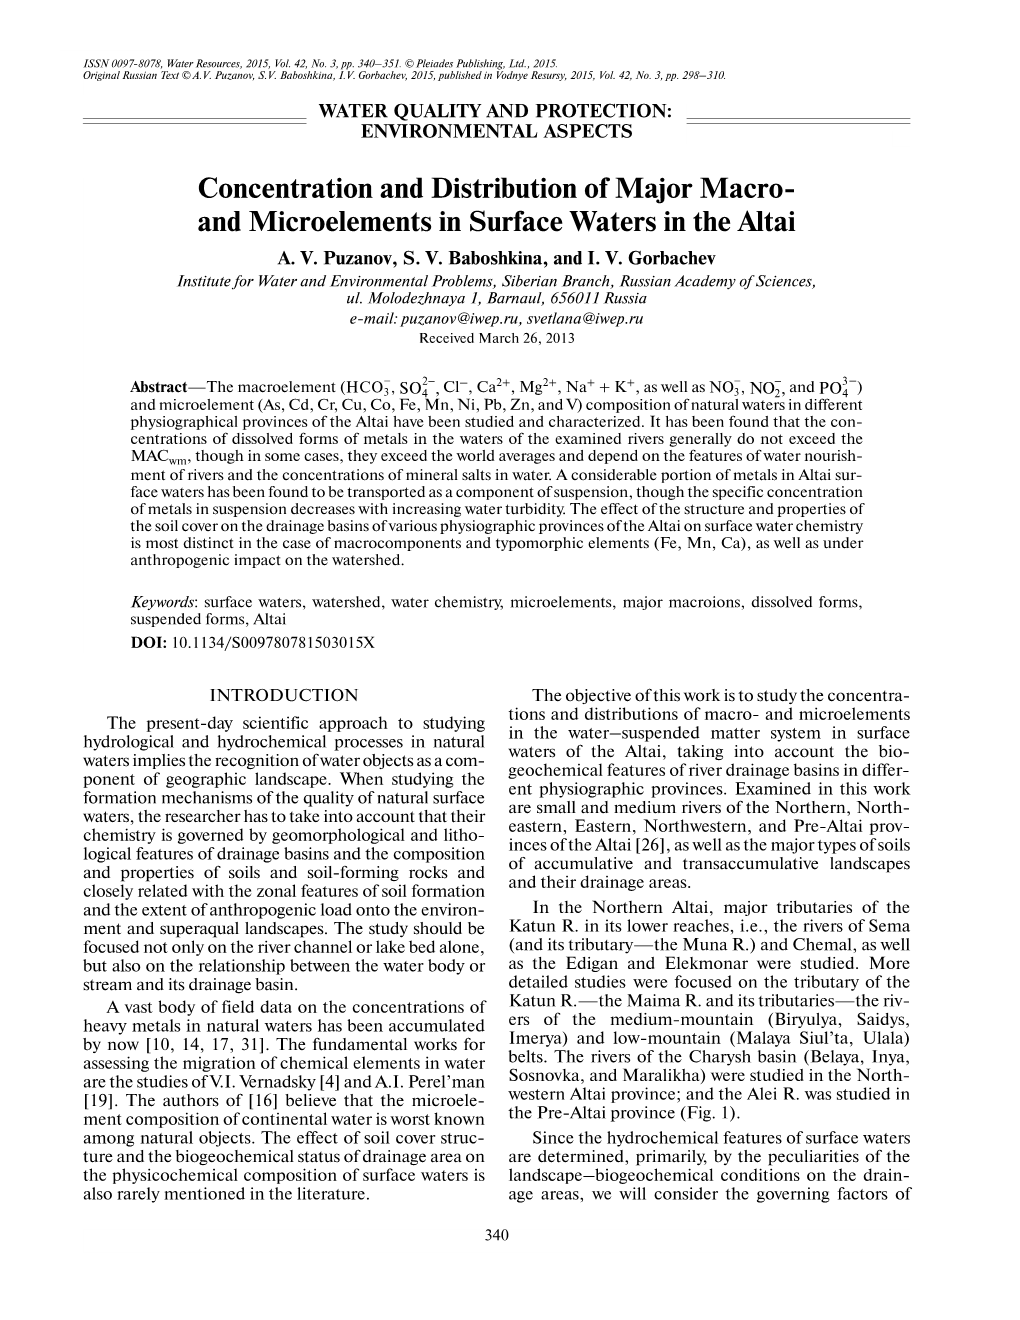 Concentration and Distribution of Major Macro and Microelements In